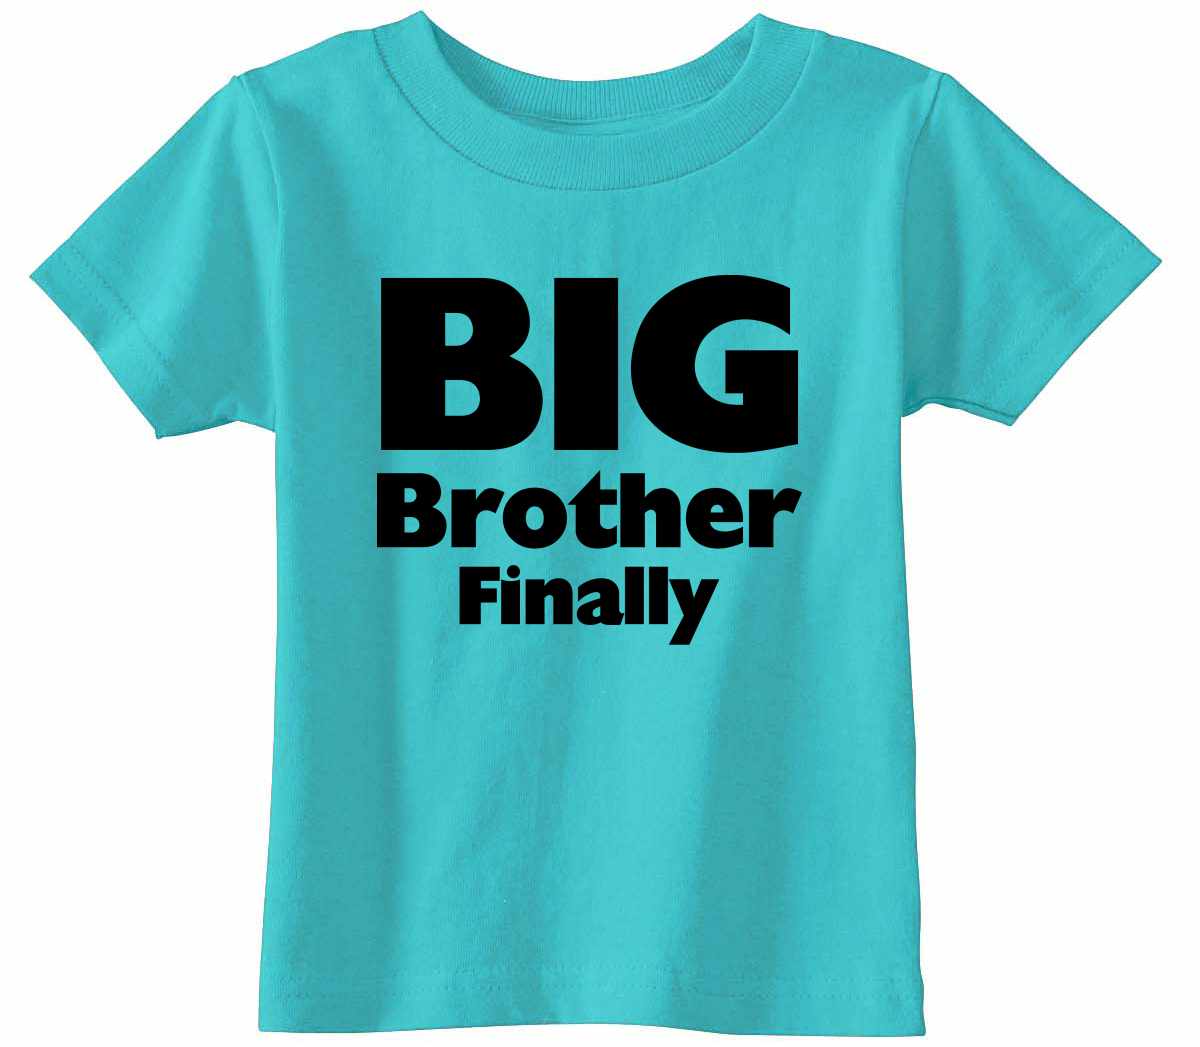 Big Brother Finally on Infant-Toddler T-Shirt (#1334-7)